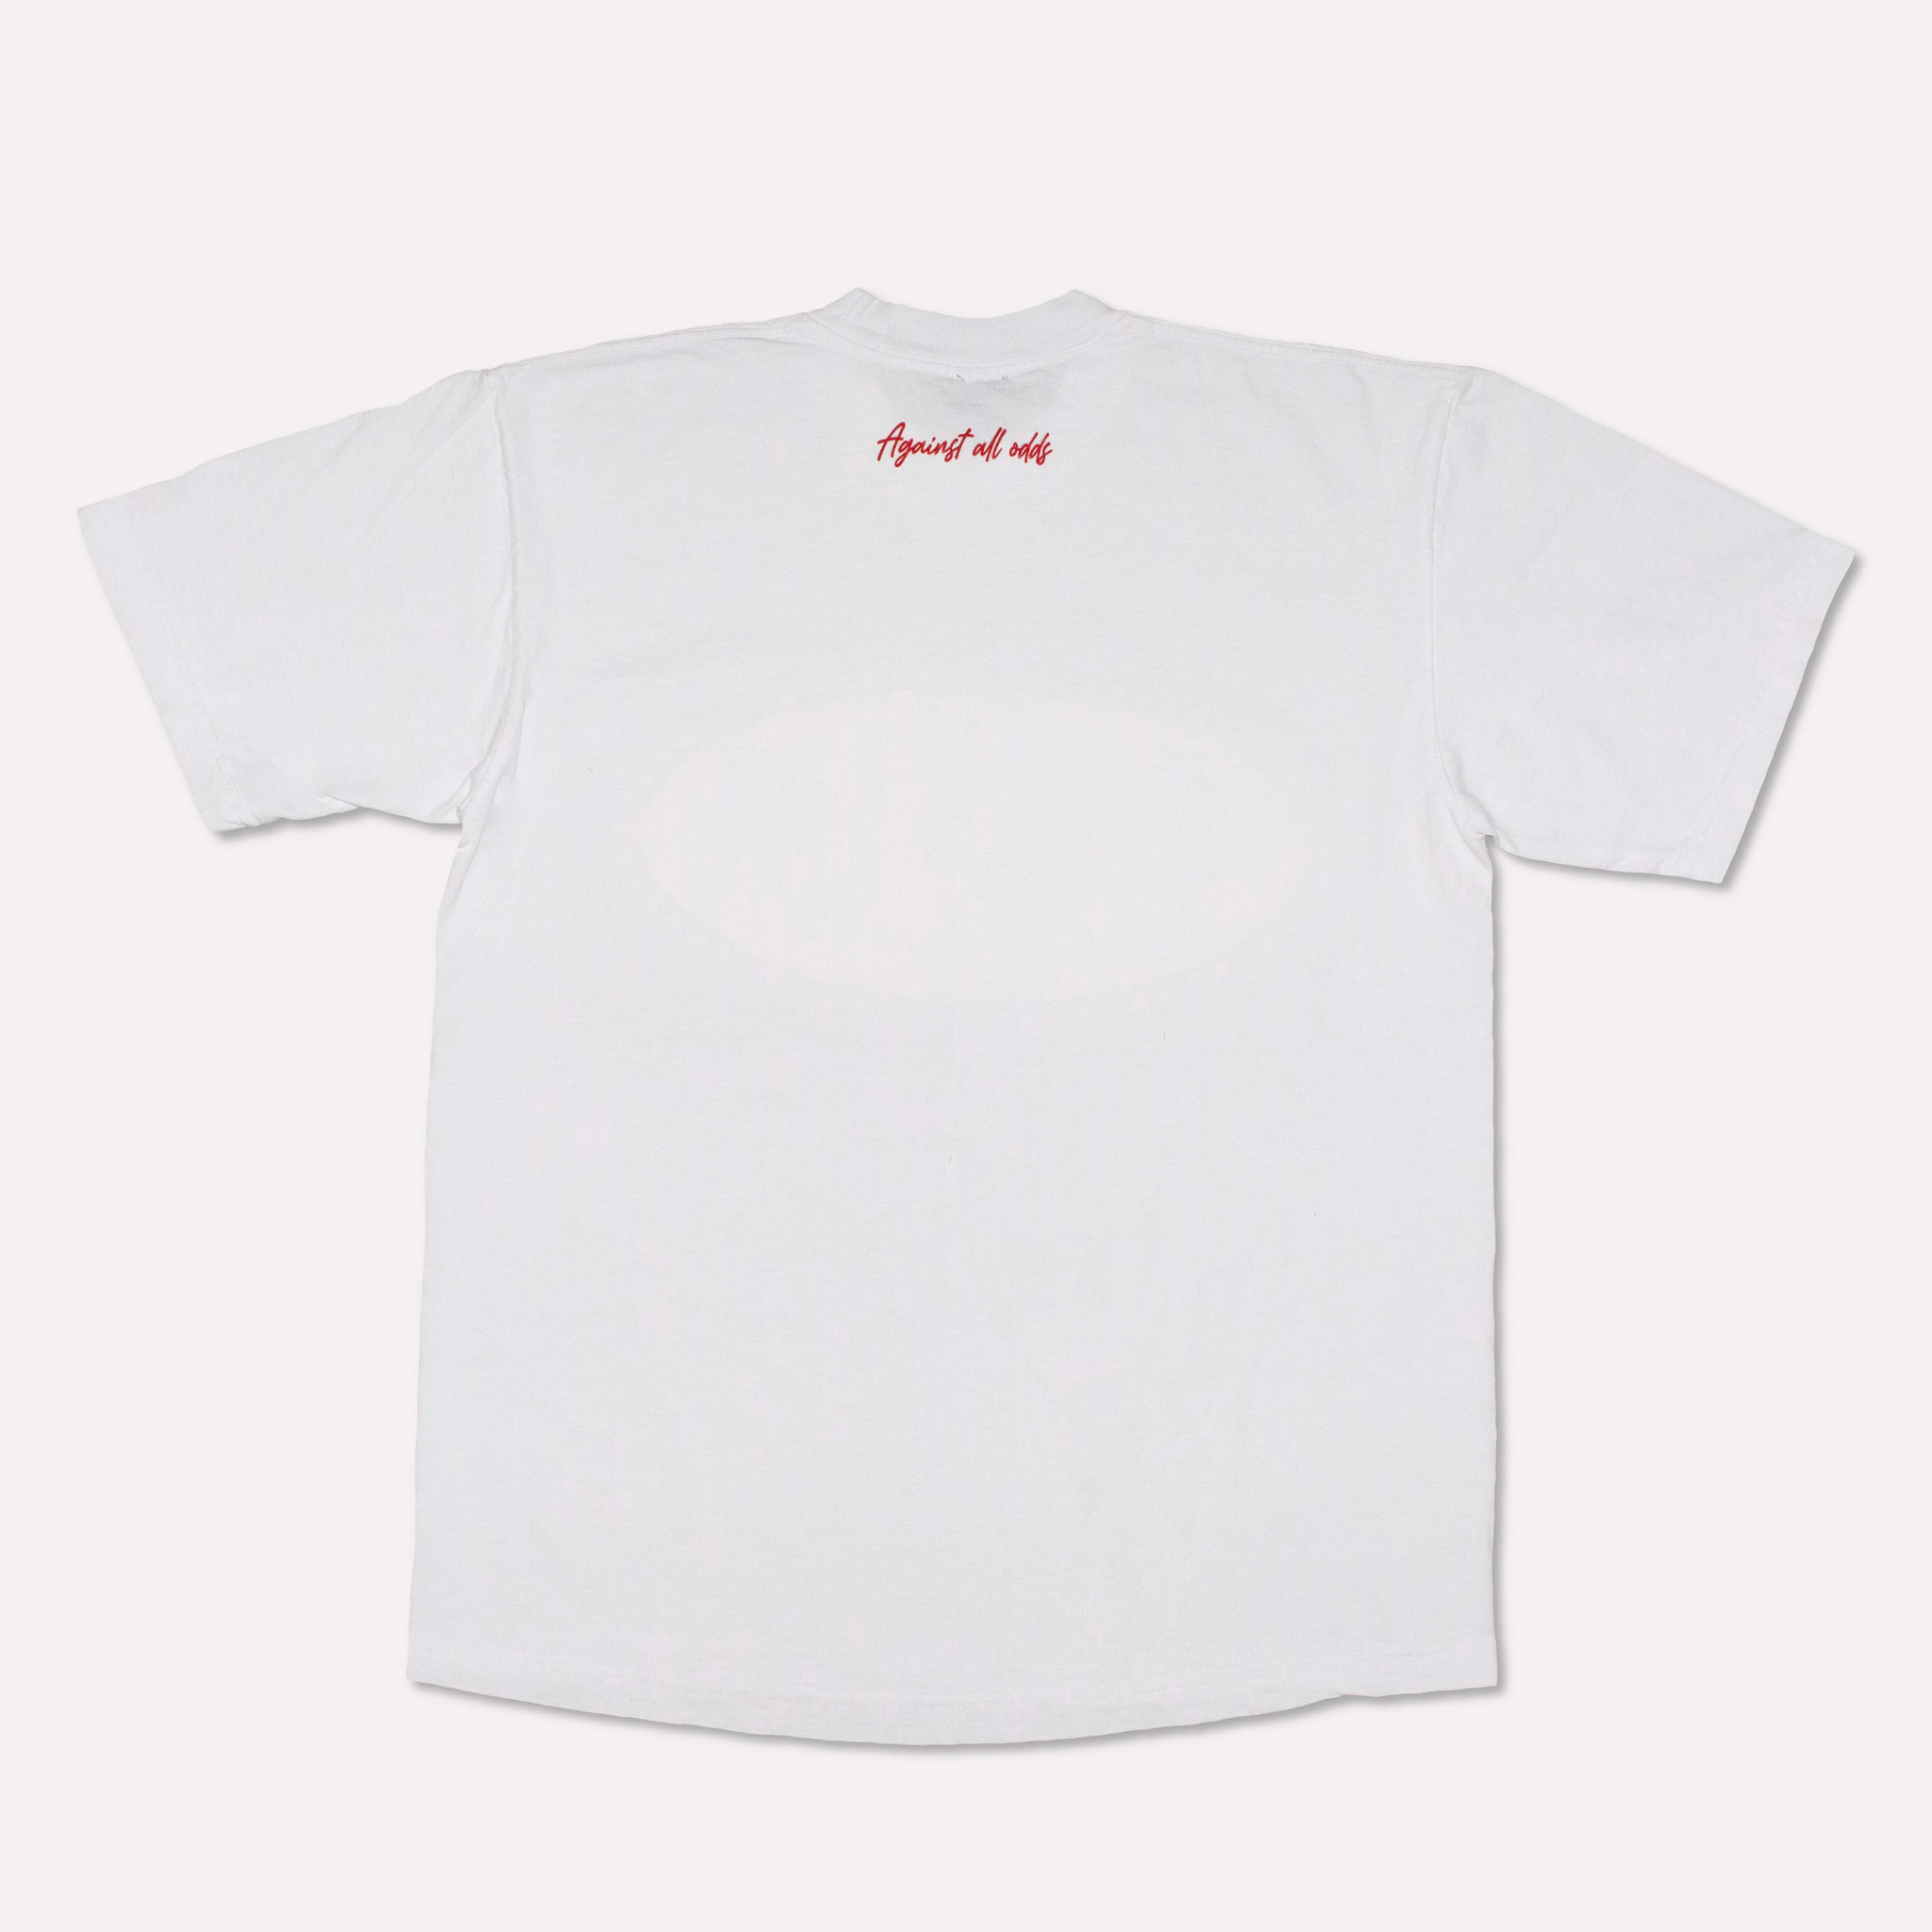 EVERYDAY T-SHIRT - "Assorted Flavors" [White]